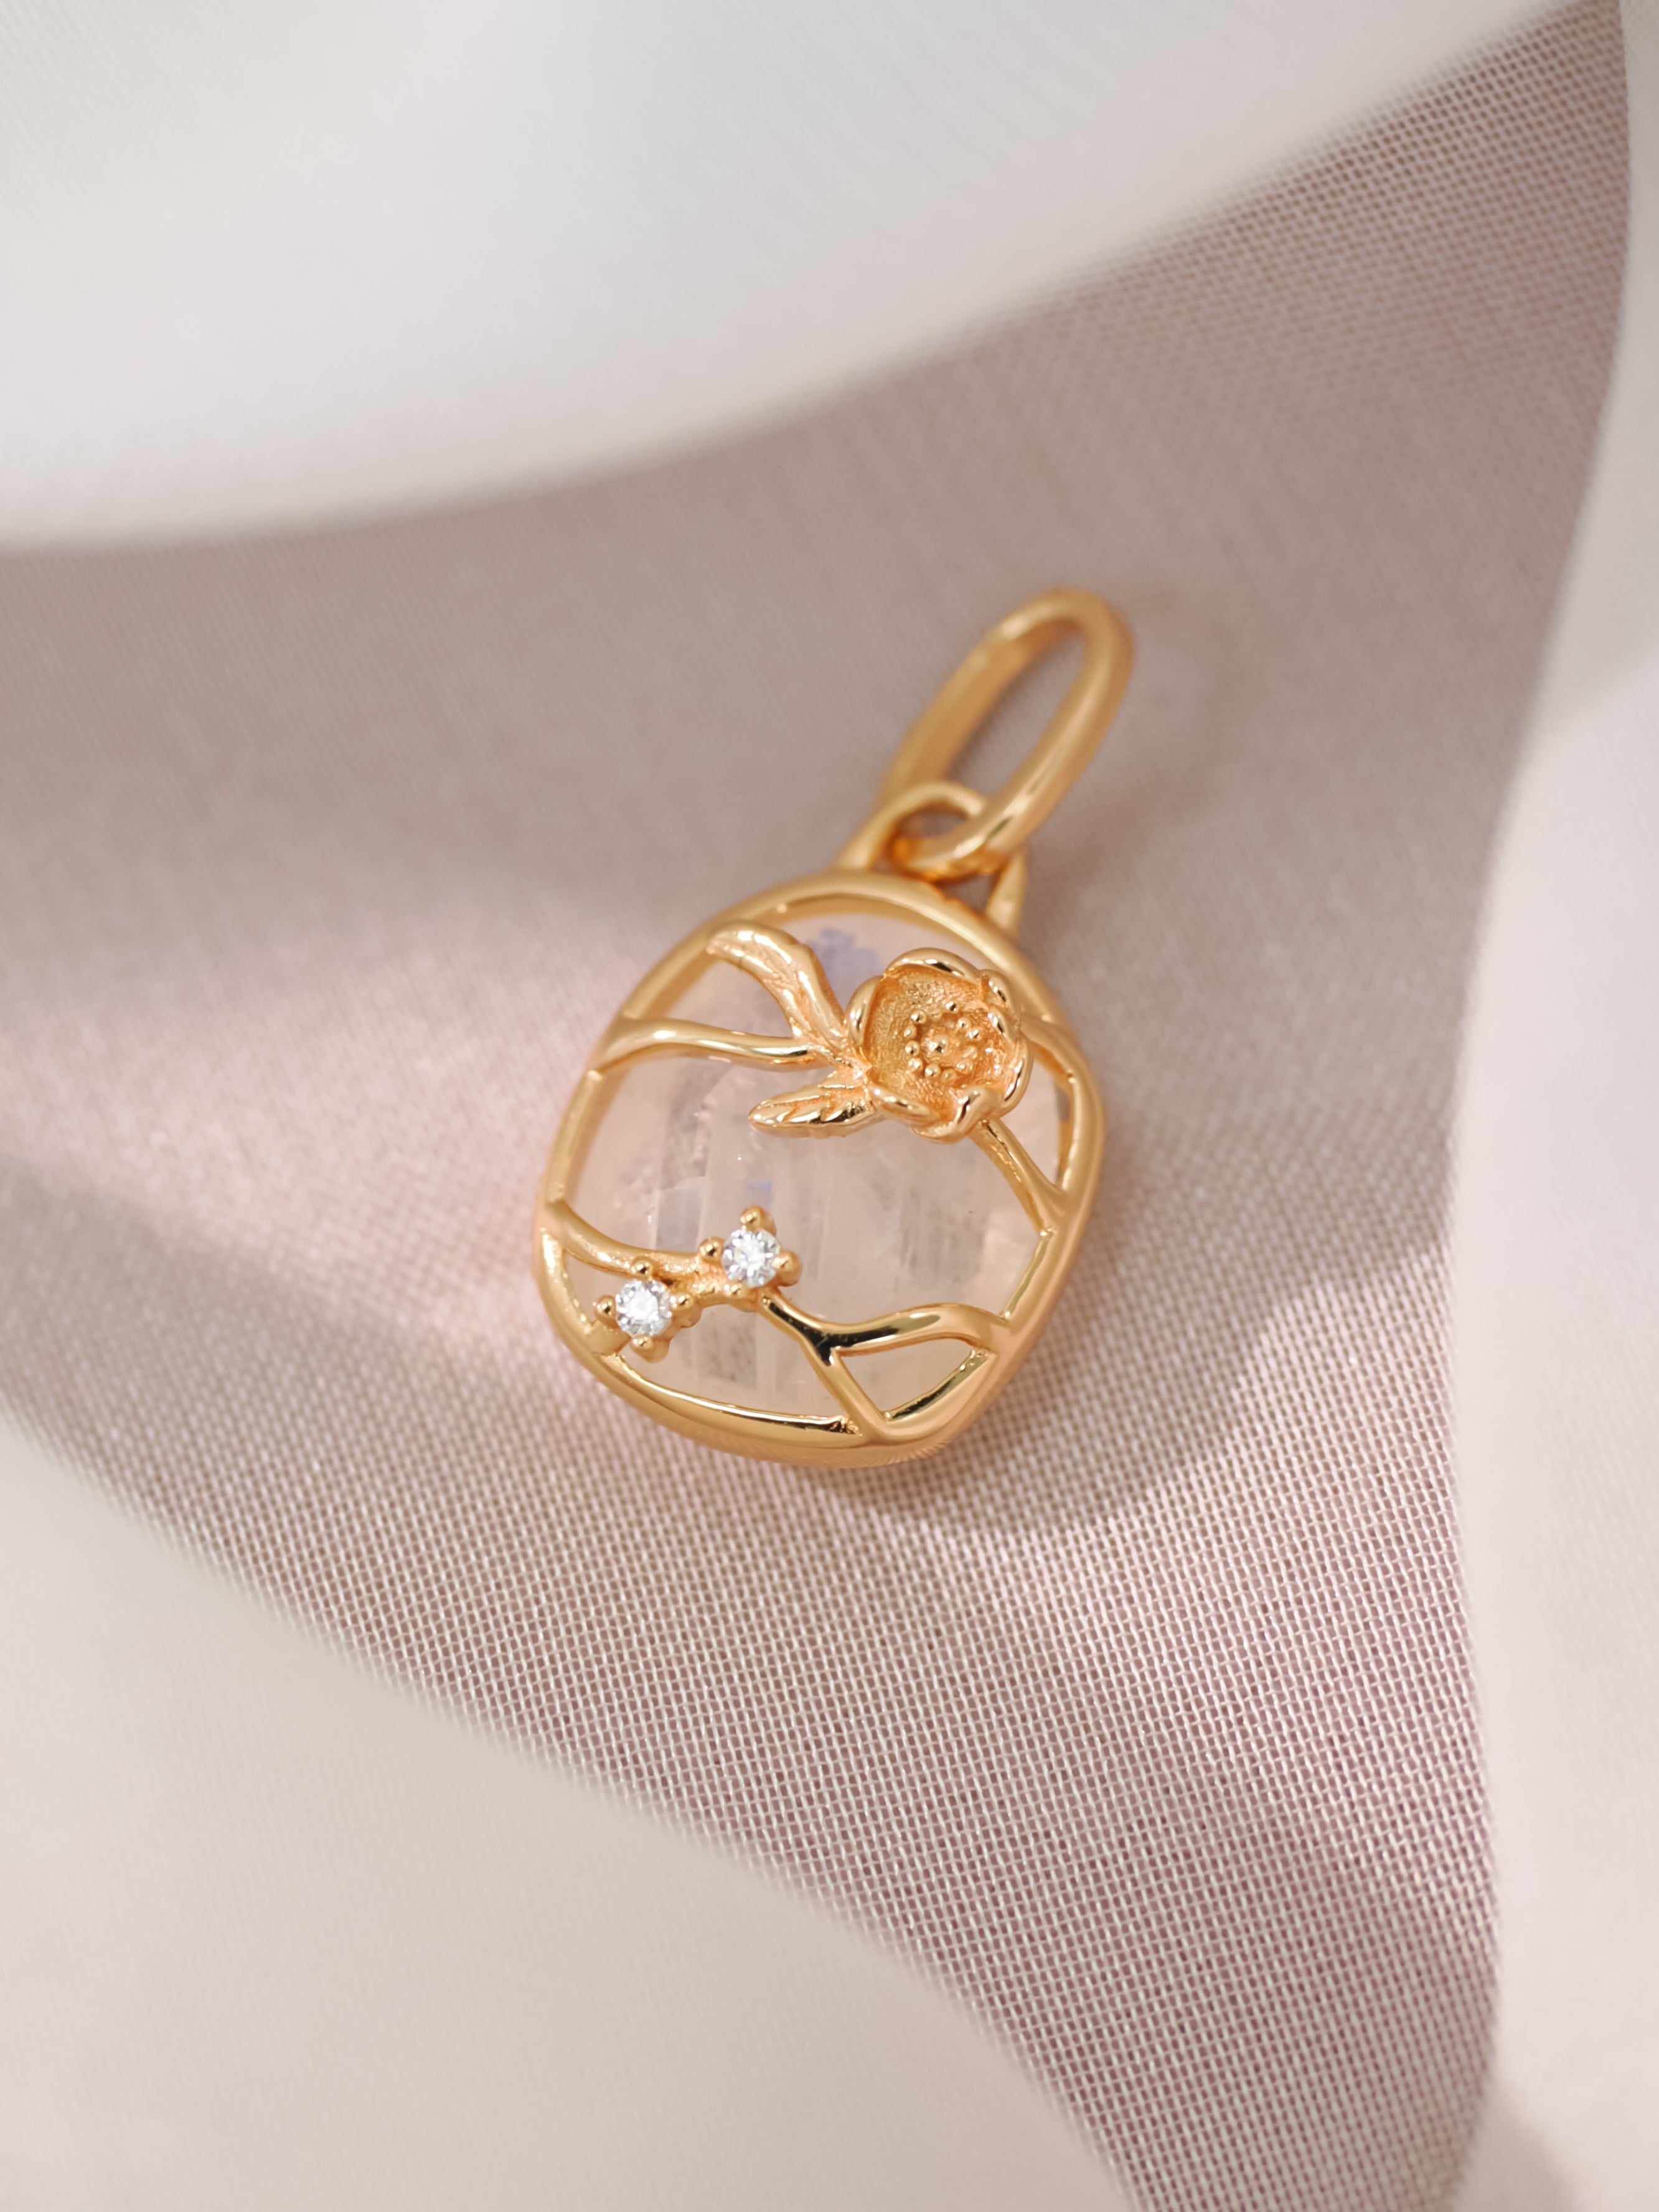 Moonstone Gold Pendant - Poppy | LOVE BY THE MOON